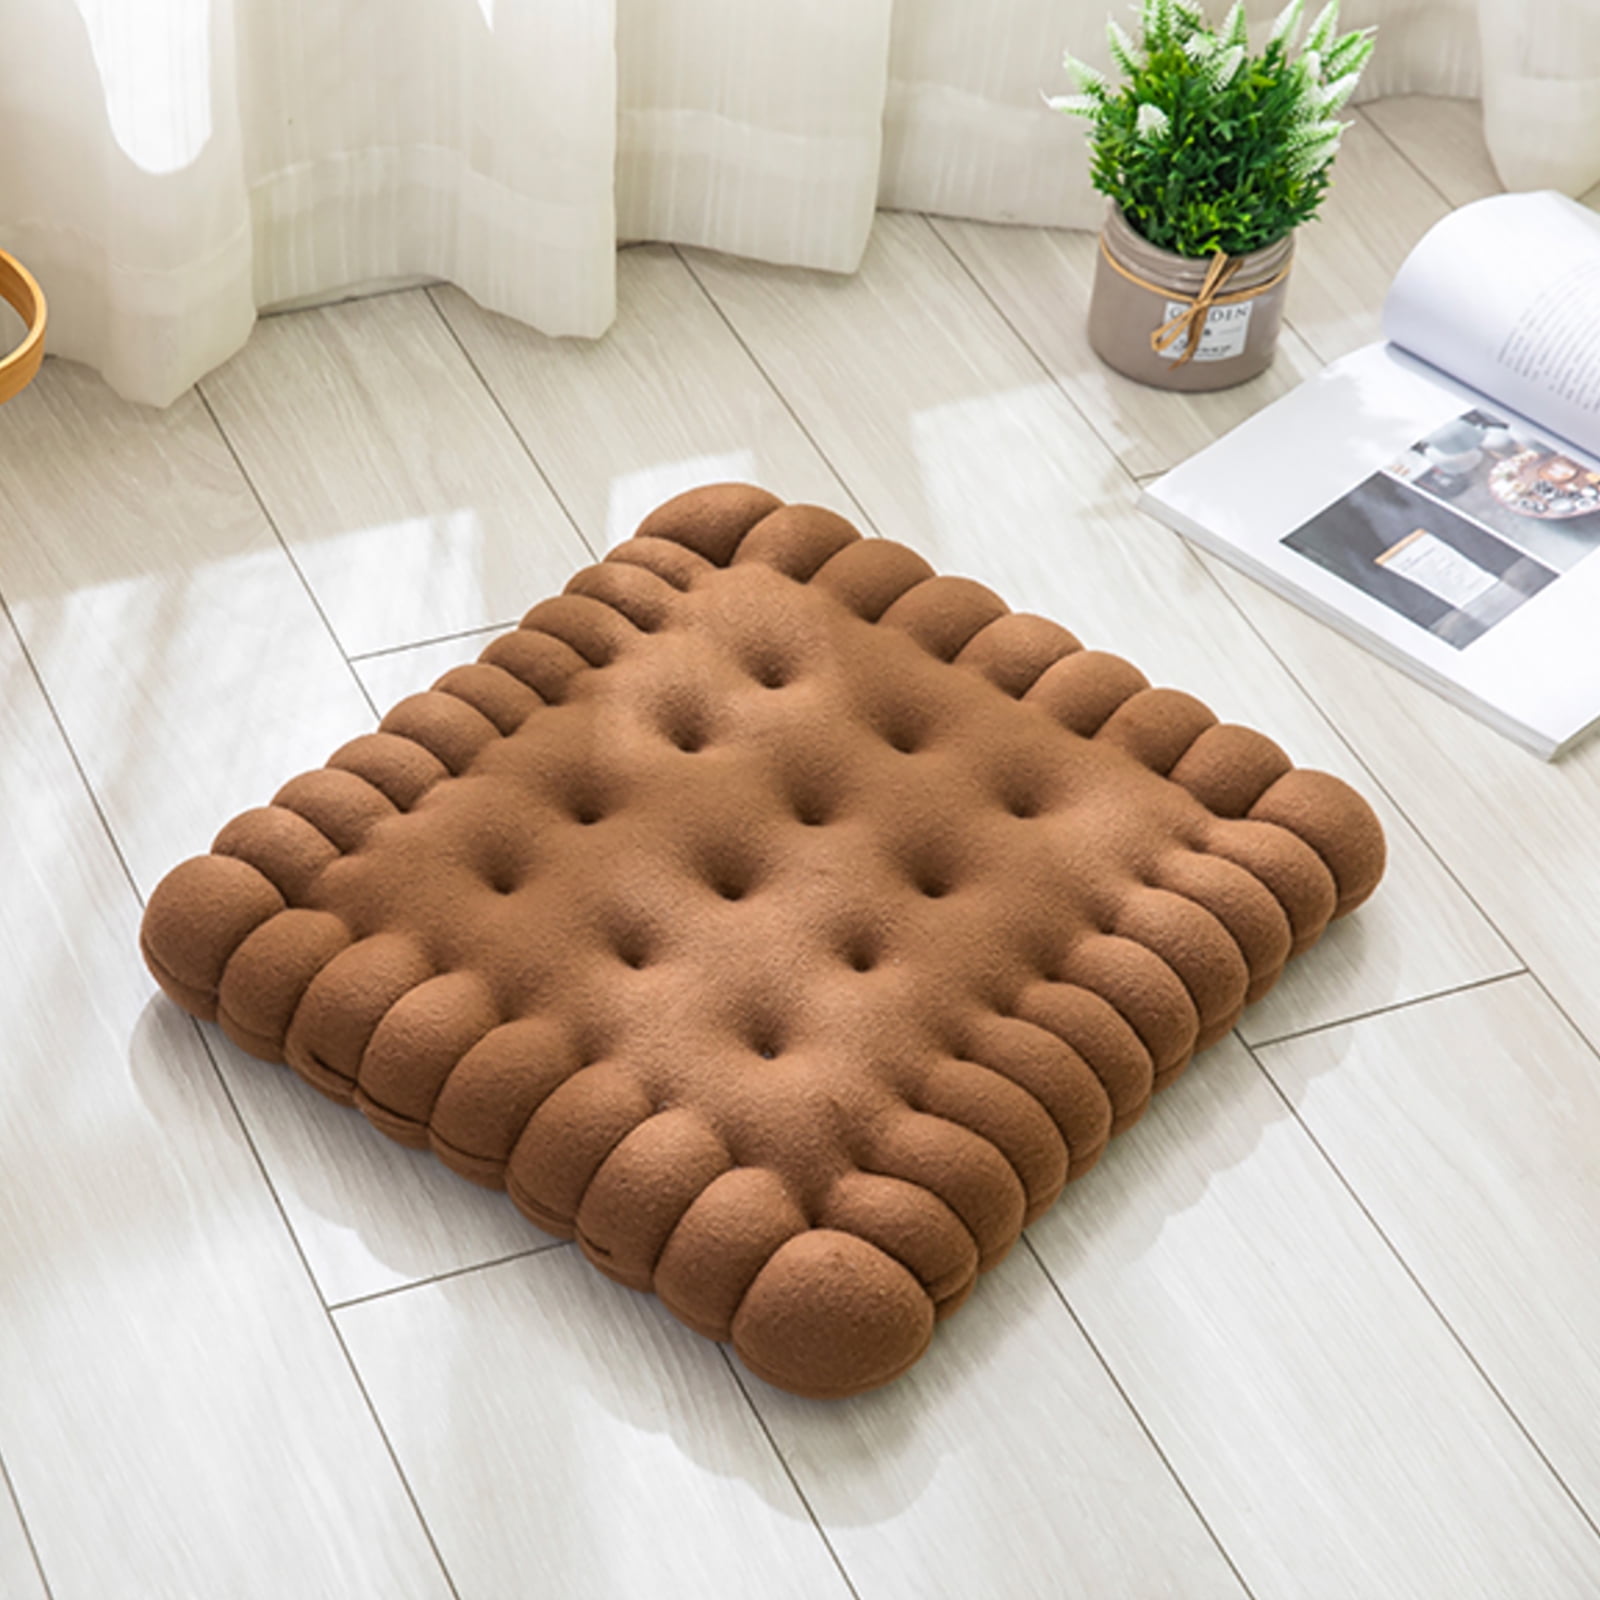 UTDKLPBXAQ Japanese Style Cotton Cookie Tatami Biscuit Pillow Cushion Adorable Soft Biscuit Tatami Cookie Floor Mat for Living Room Bedroom Chairs Dining Table